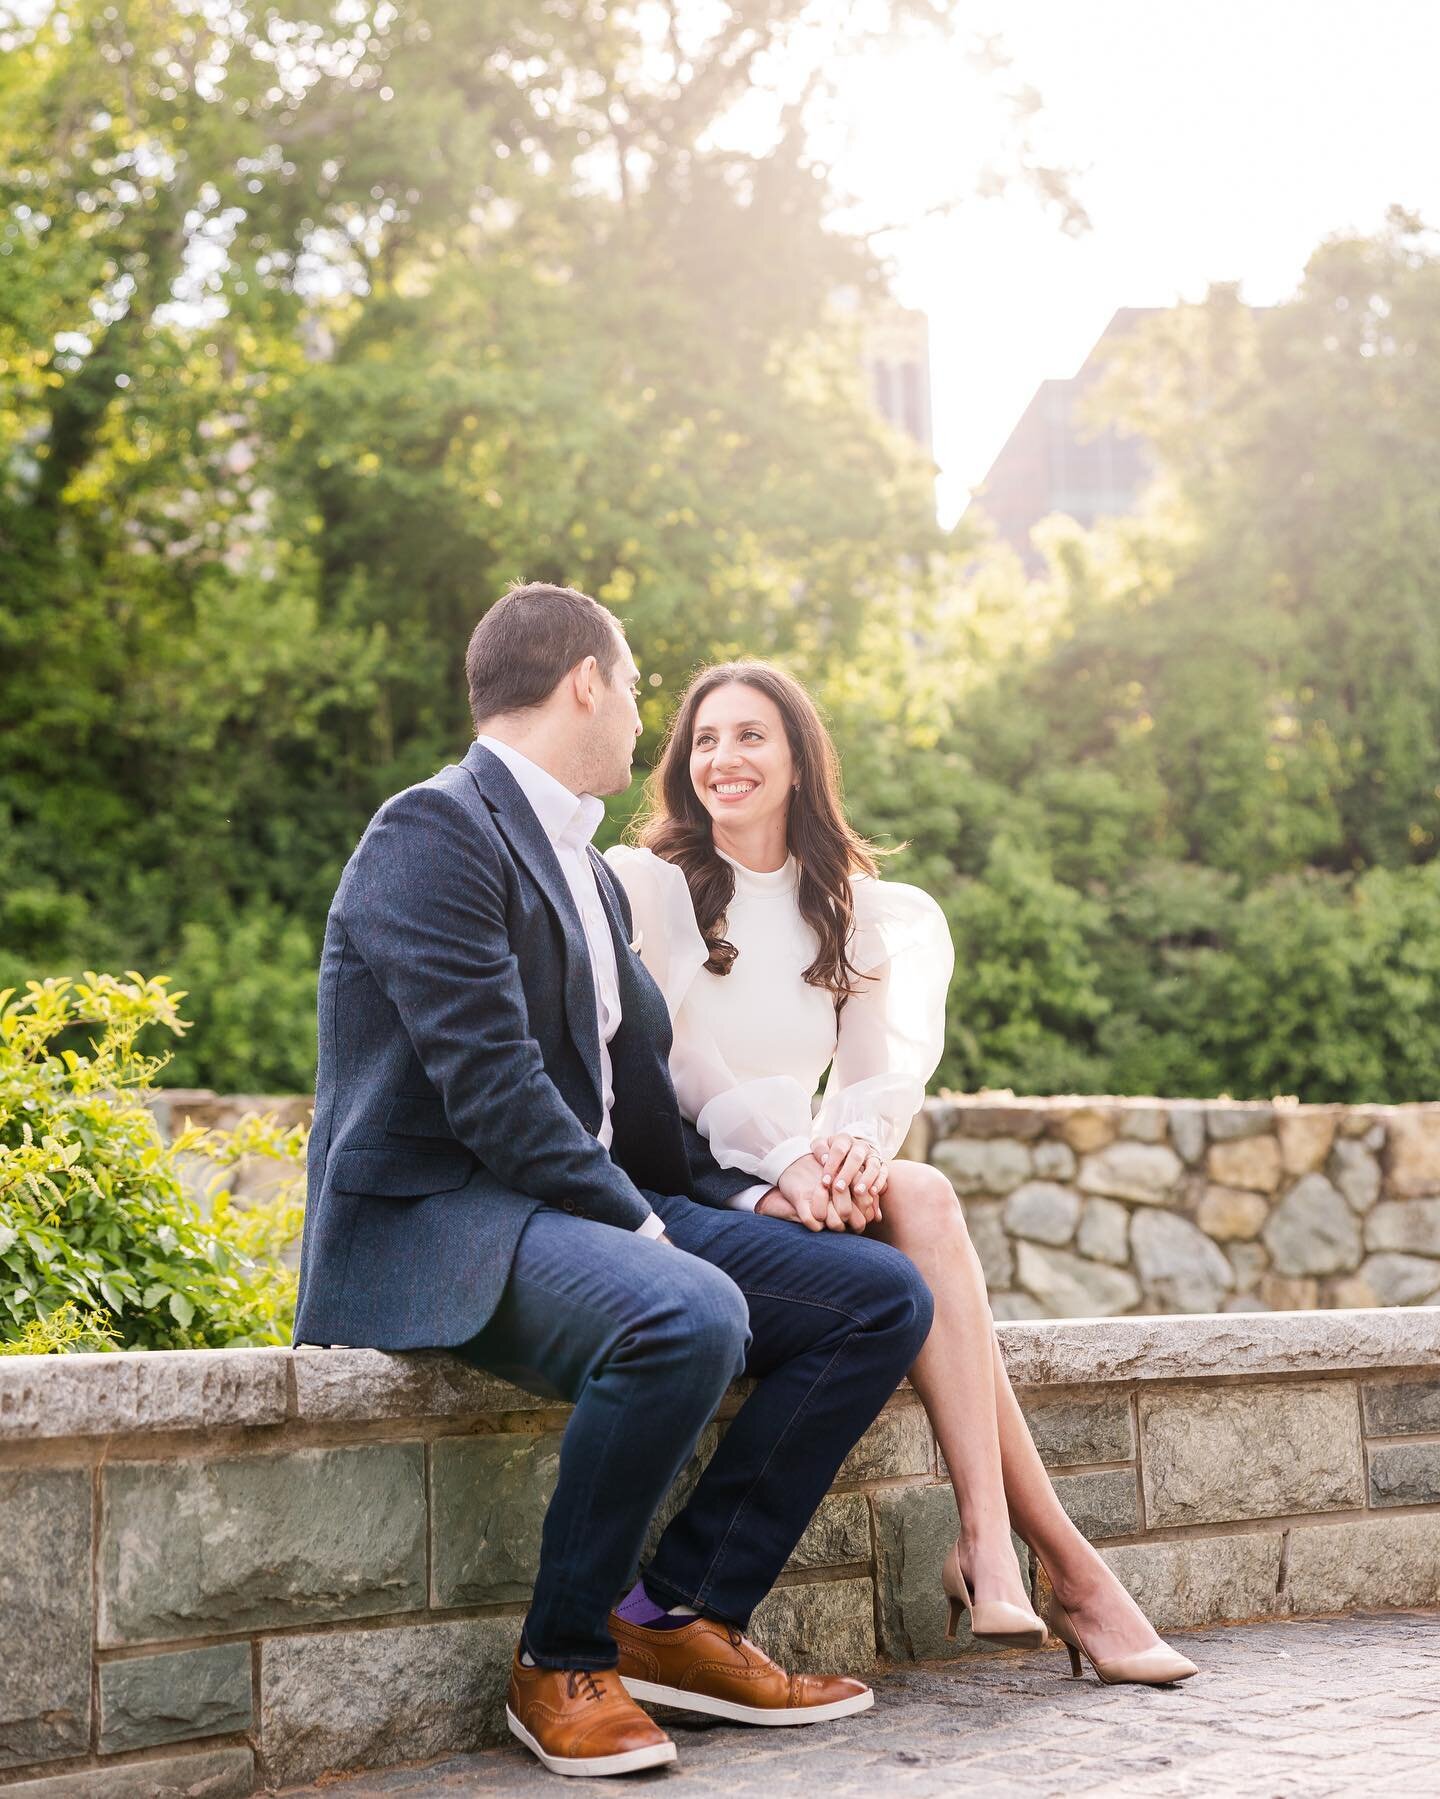 This past weekend, Elizabeth and JT gave us a tour of Roosevelt Island in Washington, DC&hellip; right where they had one of their first dates during COVID! We explored the island and caught the most beautiful patches of light to photograph! And no j